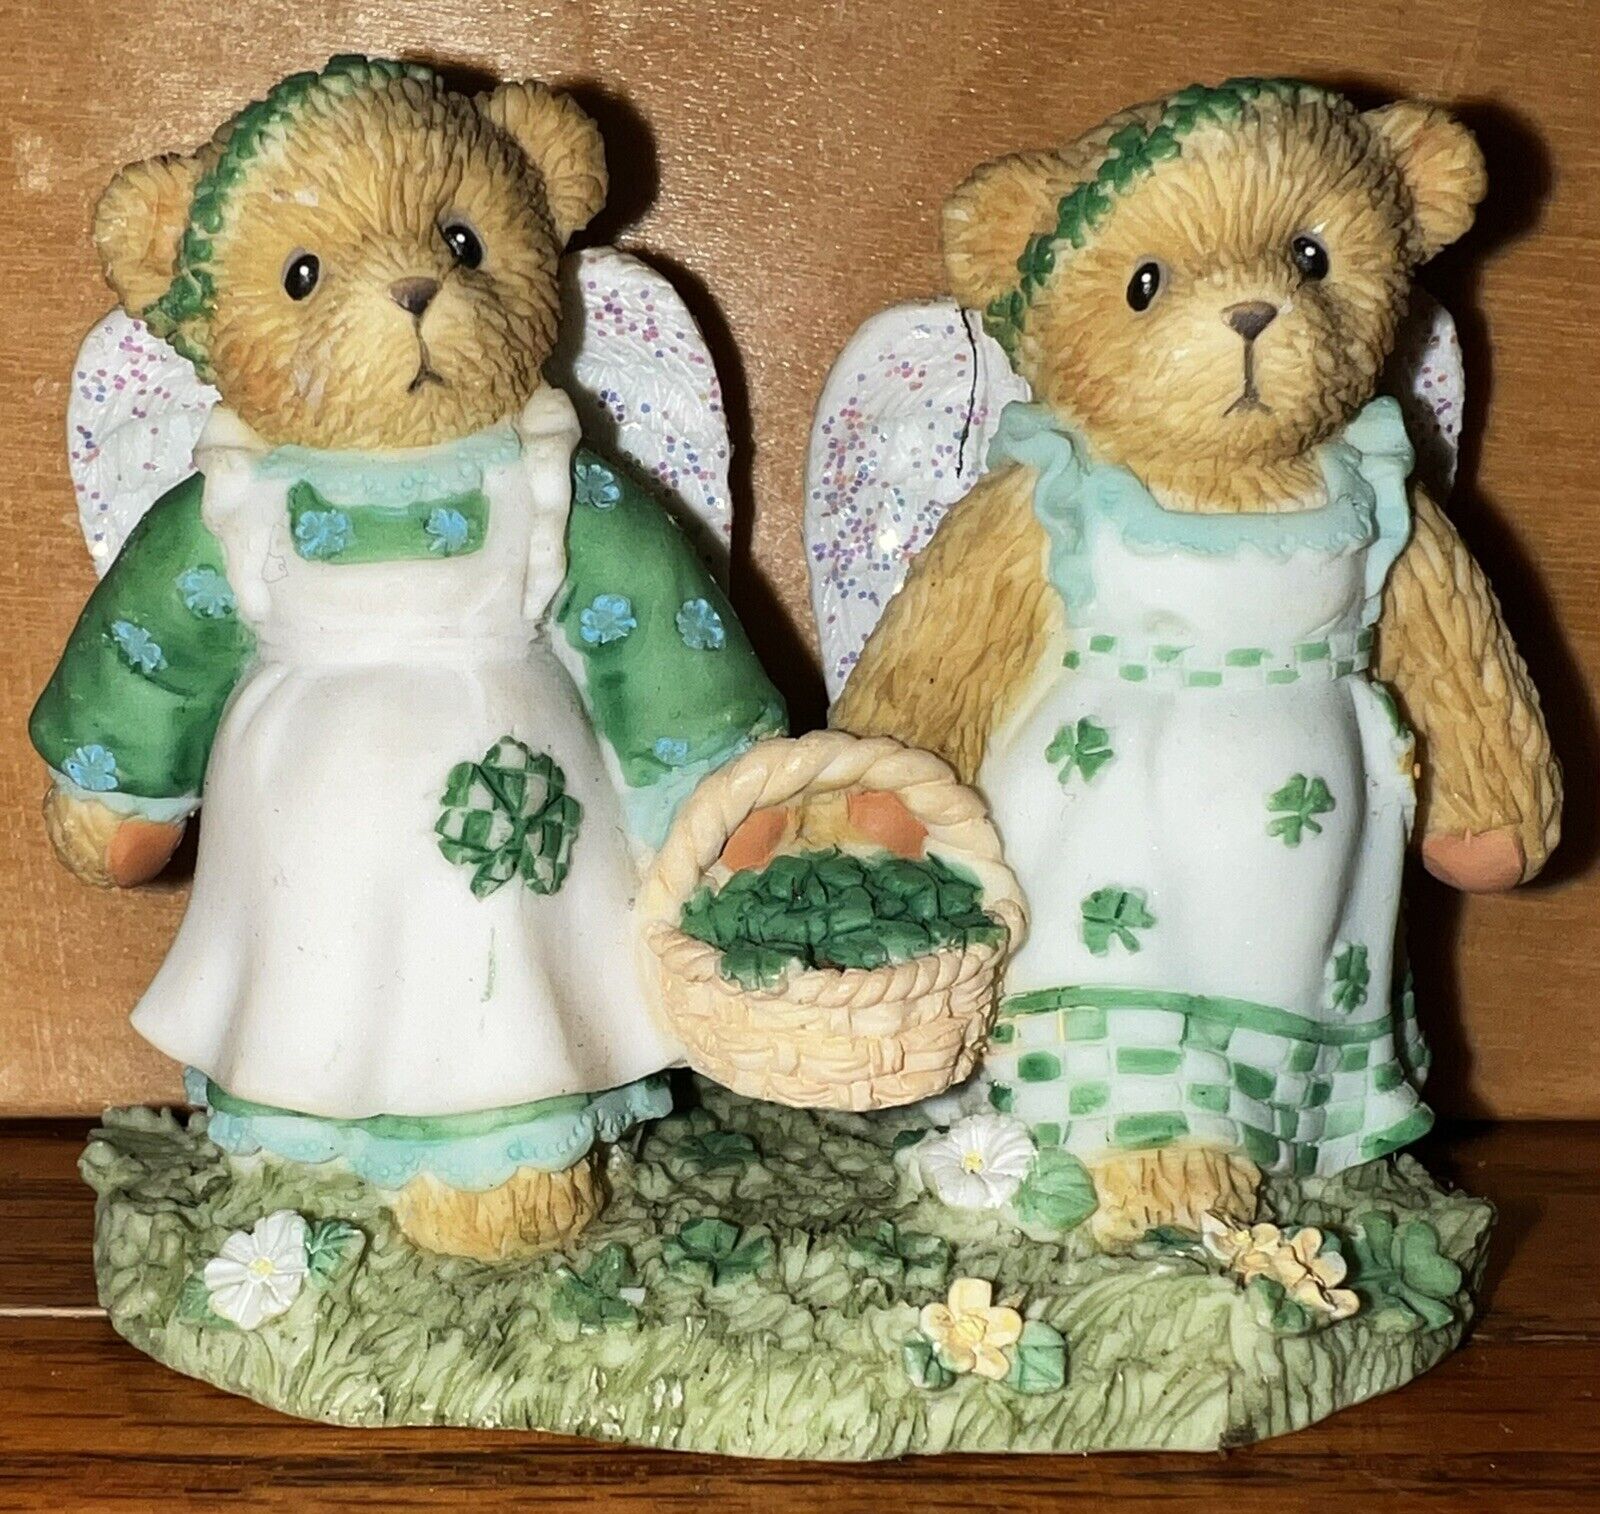 Hamilton Collection Cherished Teddies “May Blessings Outnumber The Shamrocks”